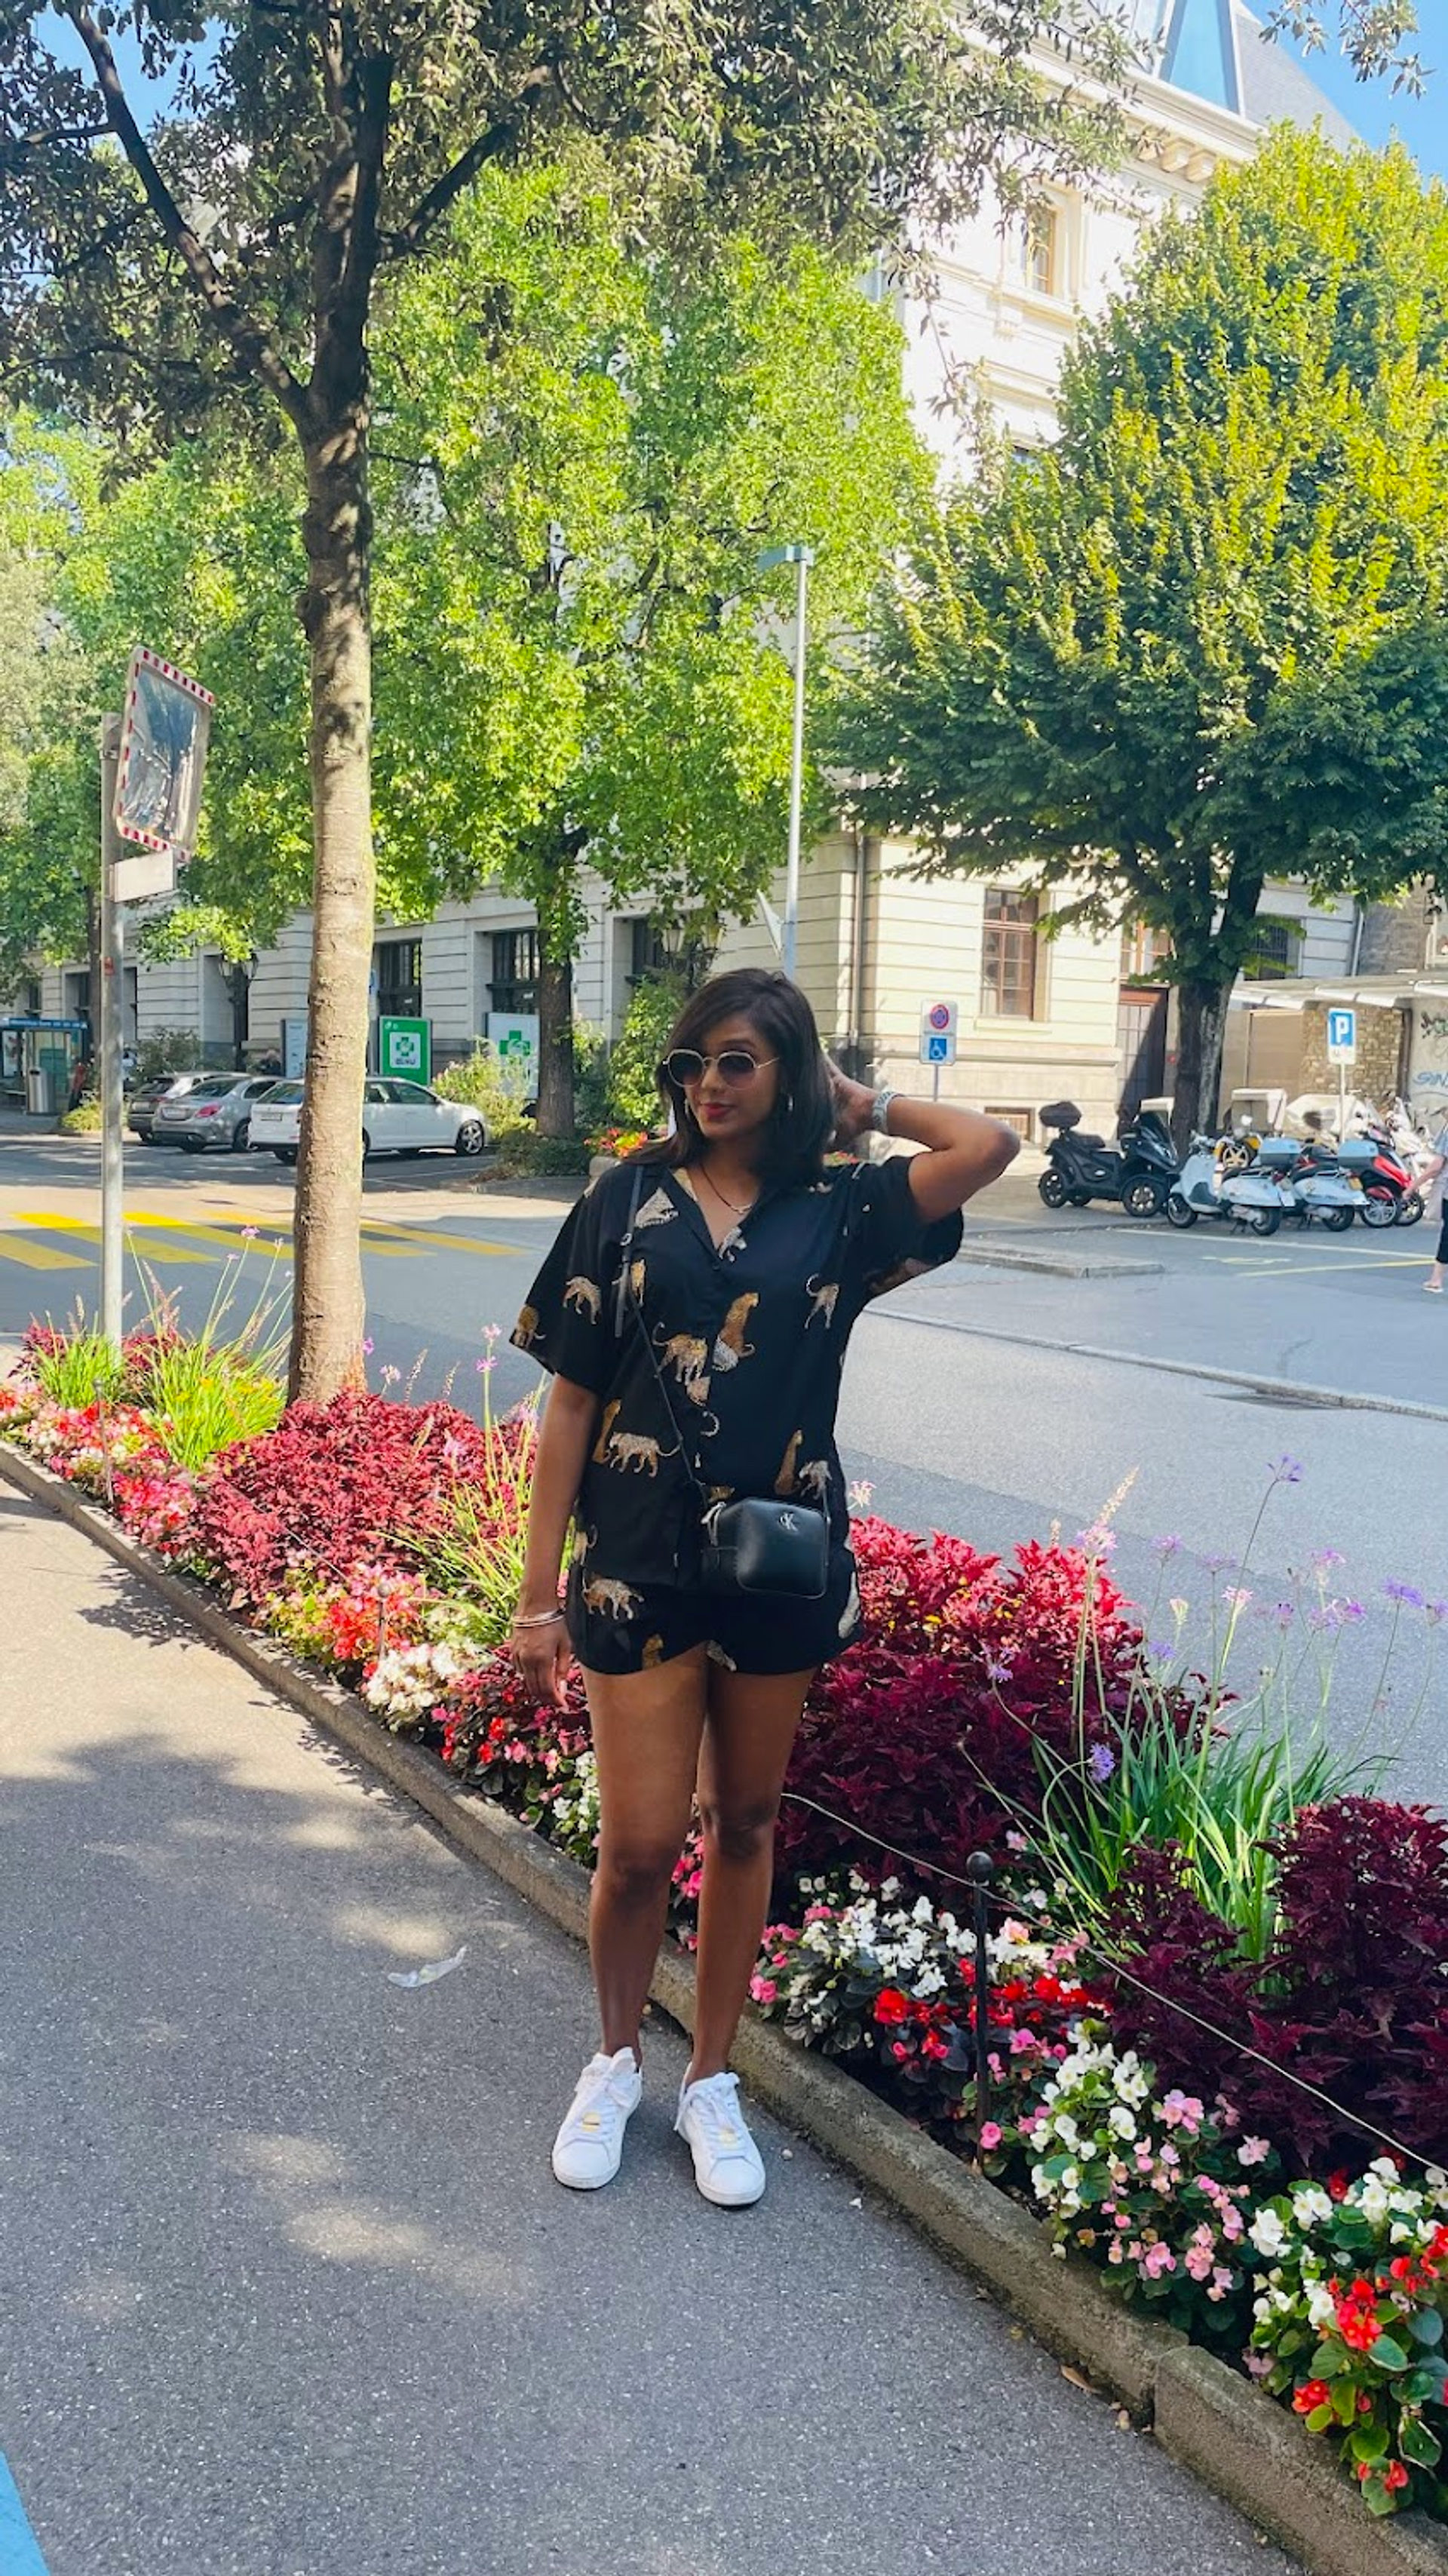 Dana posing in the streets of Montreux.